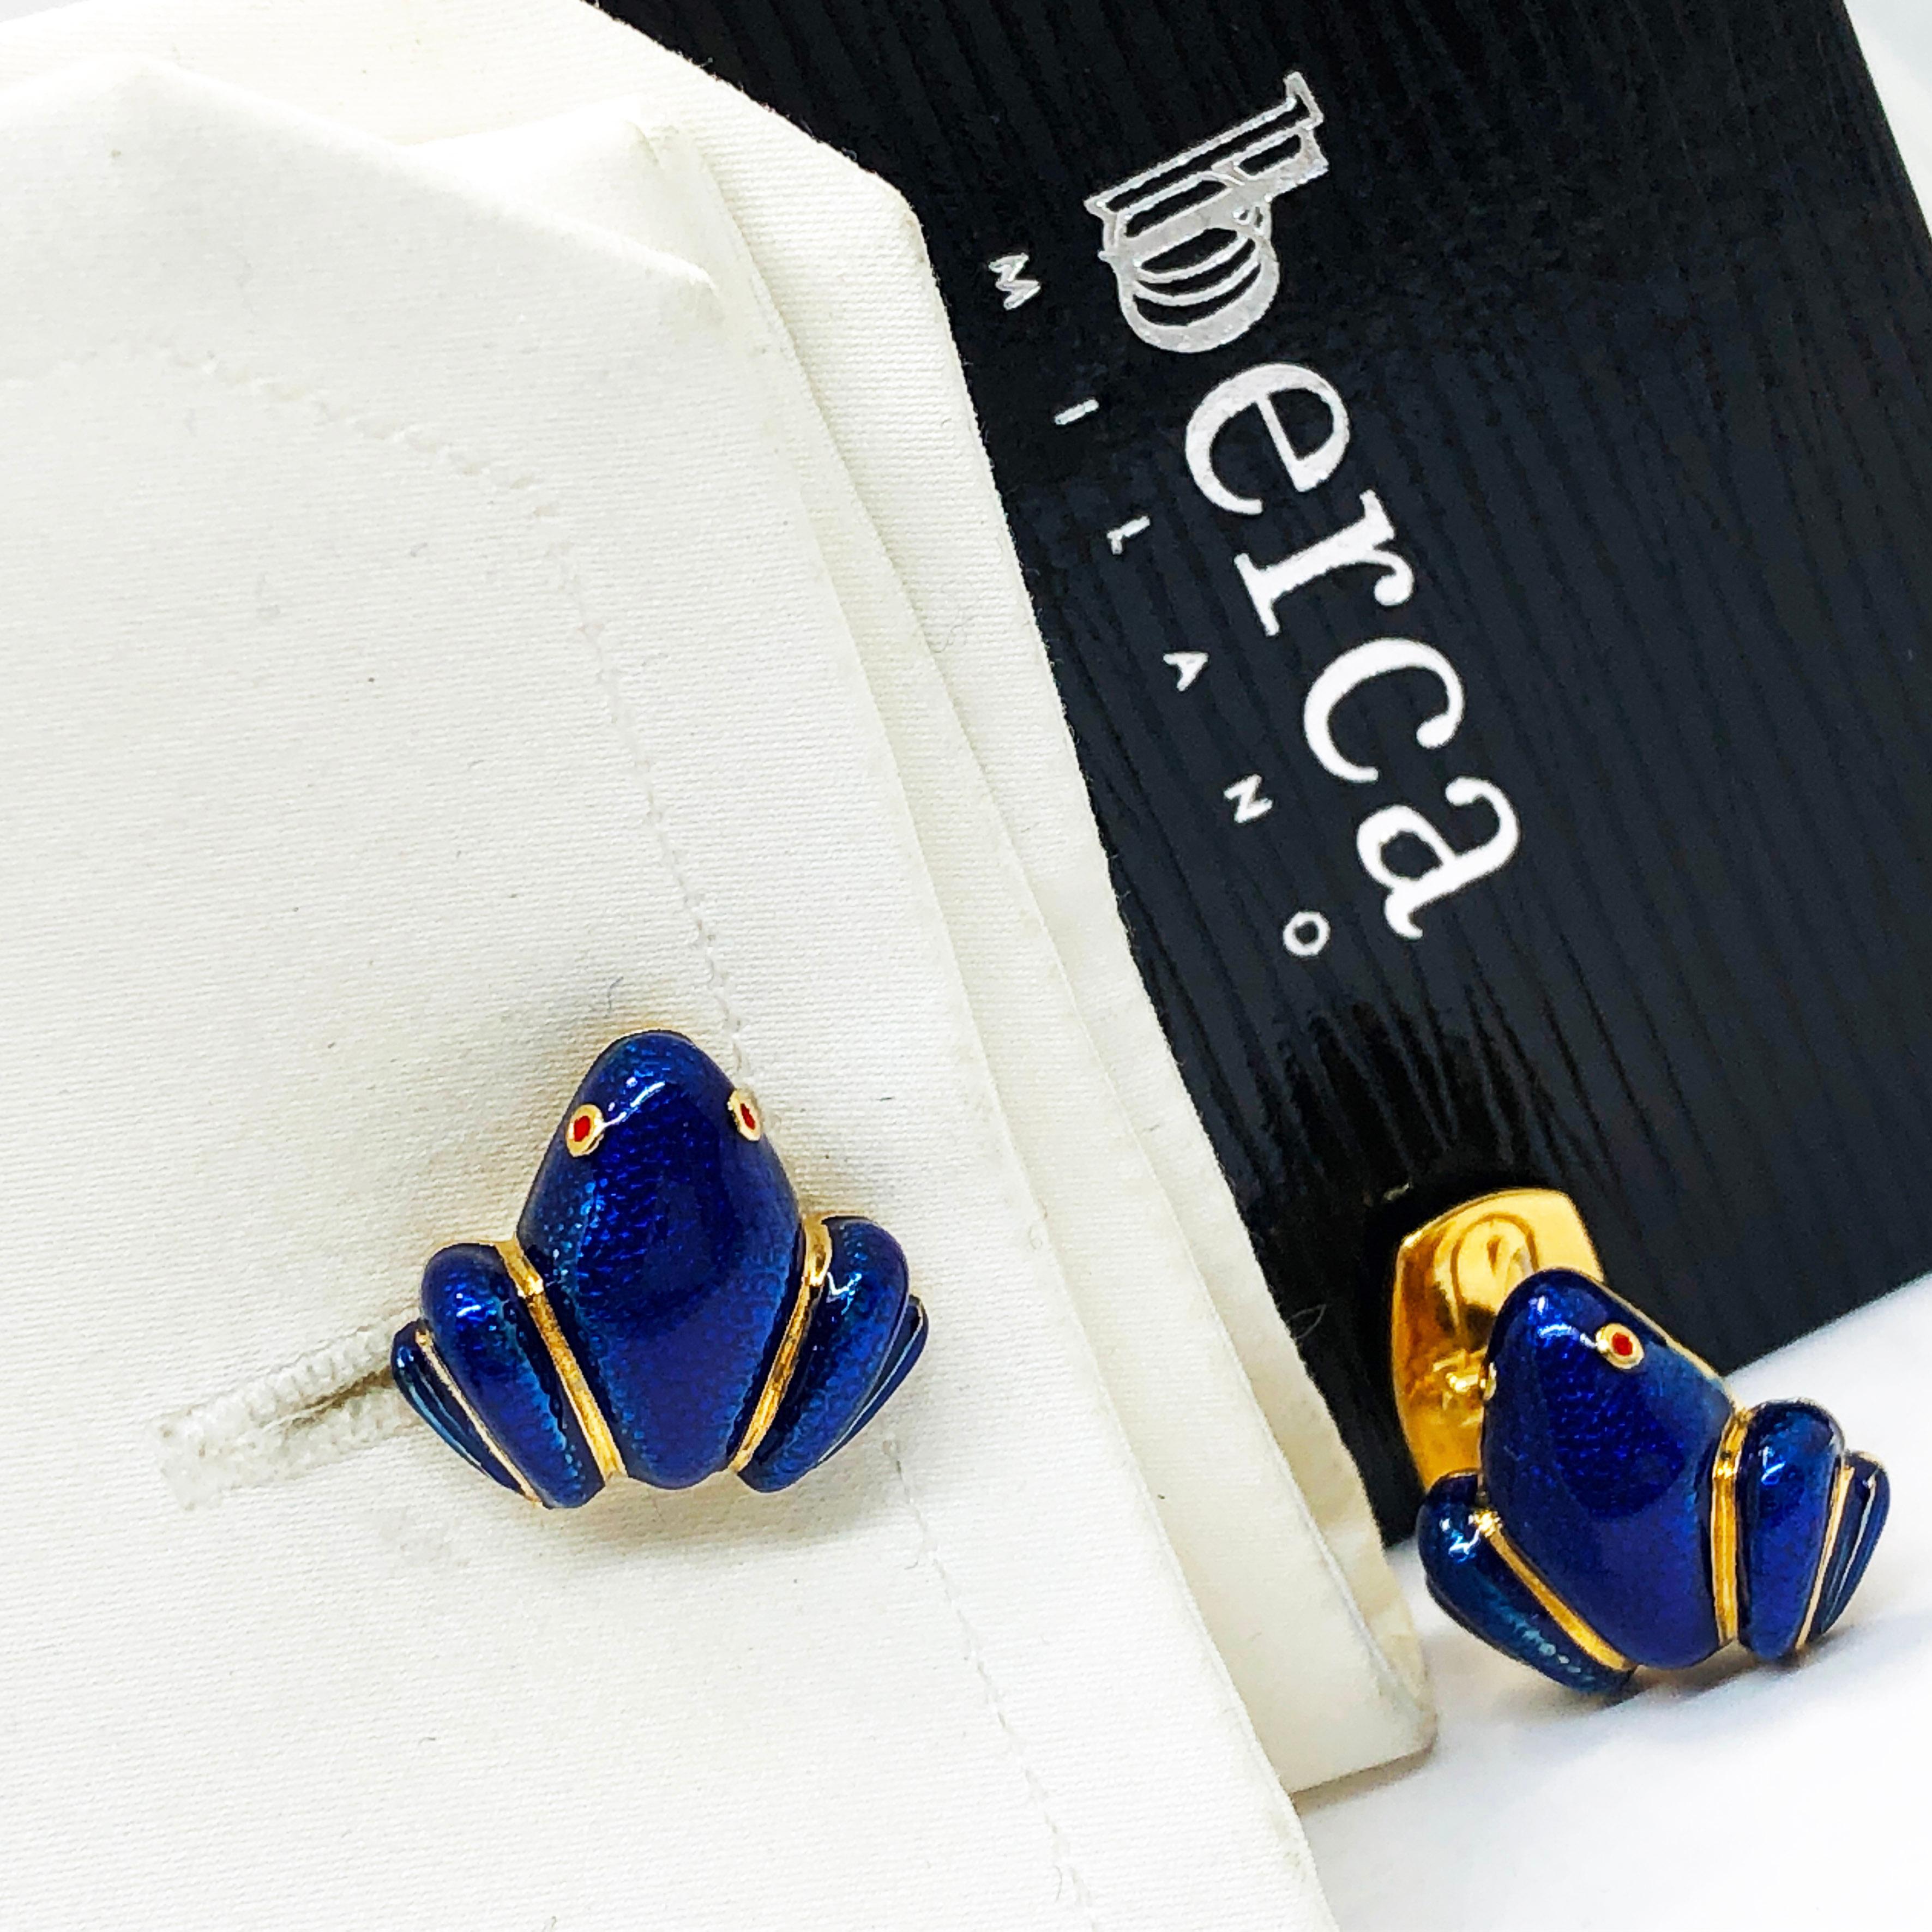 Unique and Chic Navy Blue Hand Enamelled Little Frog Shaped T-Bar Back, Sterling Silver Yellow Gold Plated Cufflinks.
In our smart Suede Leather Case and Pouch.
